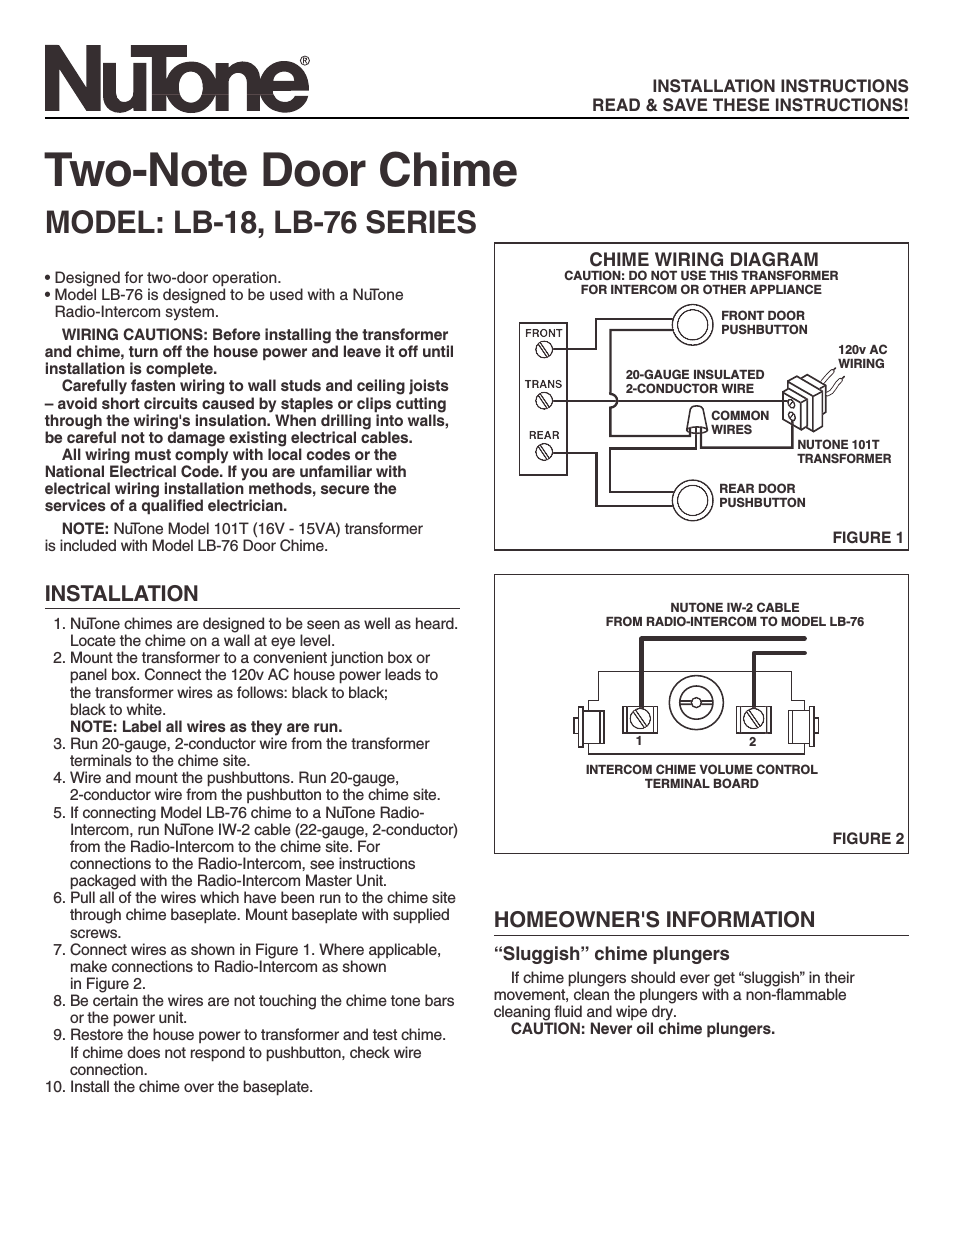 TWO-NOTE DOOR CHIME LB-18